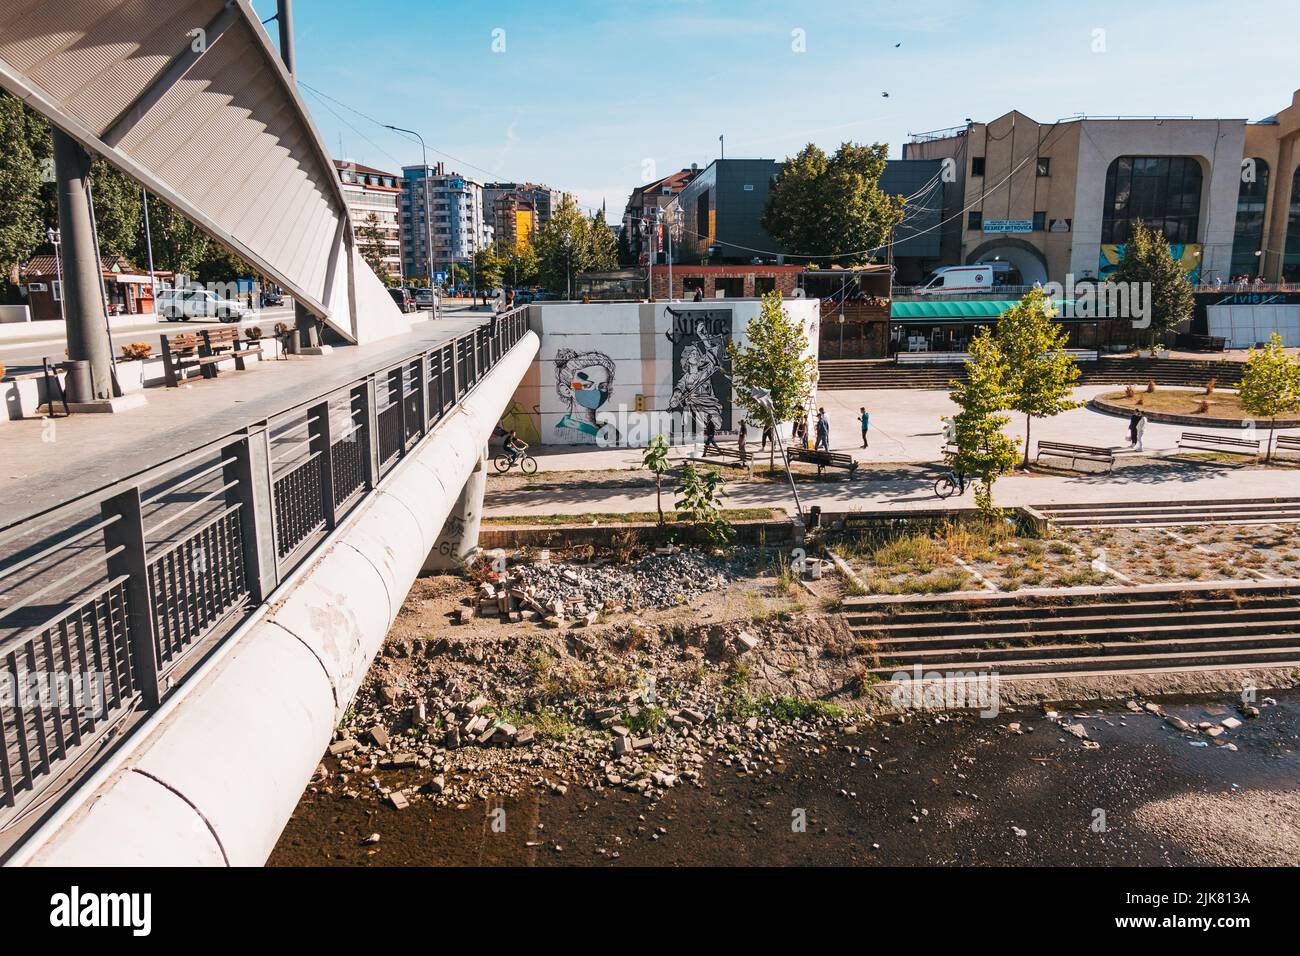 The New Bridge in Mitrovica, northern Kosovo, over the Ibar river which divides the city into north and south. Stock Photo